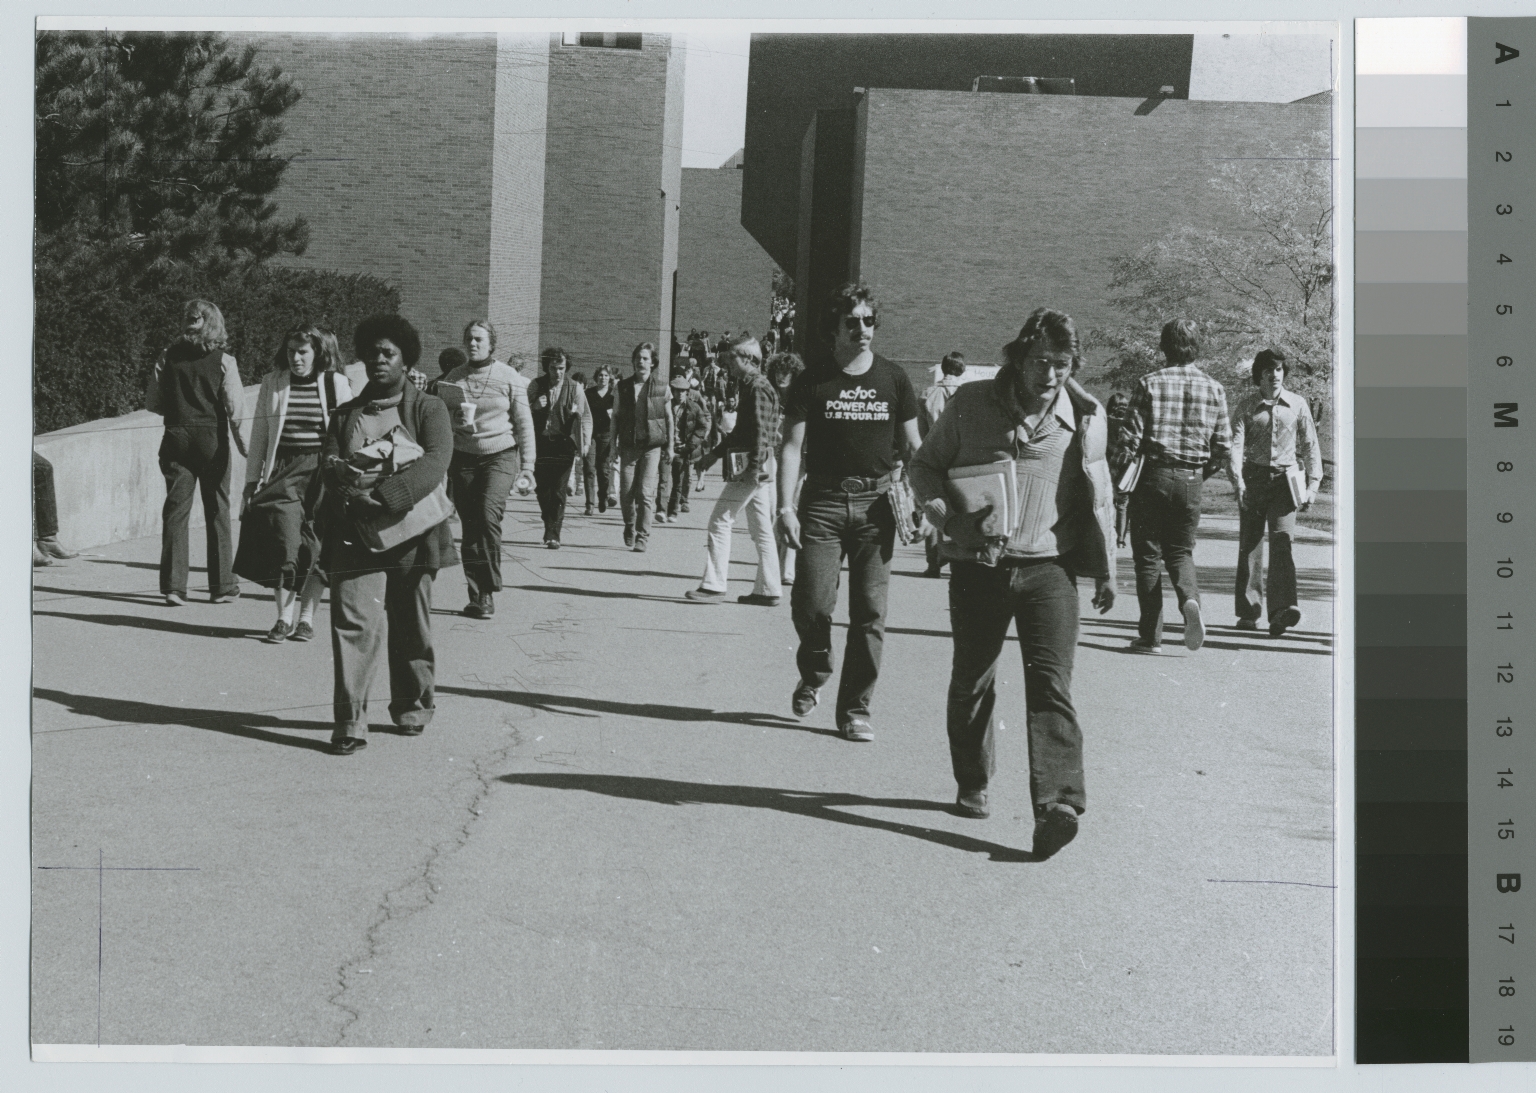 Students walking on campus, Rochester Institute of Technology